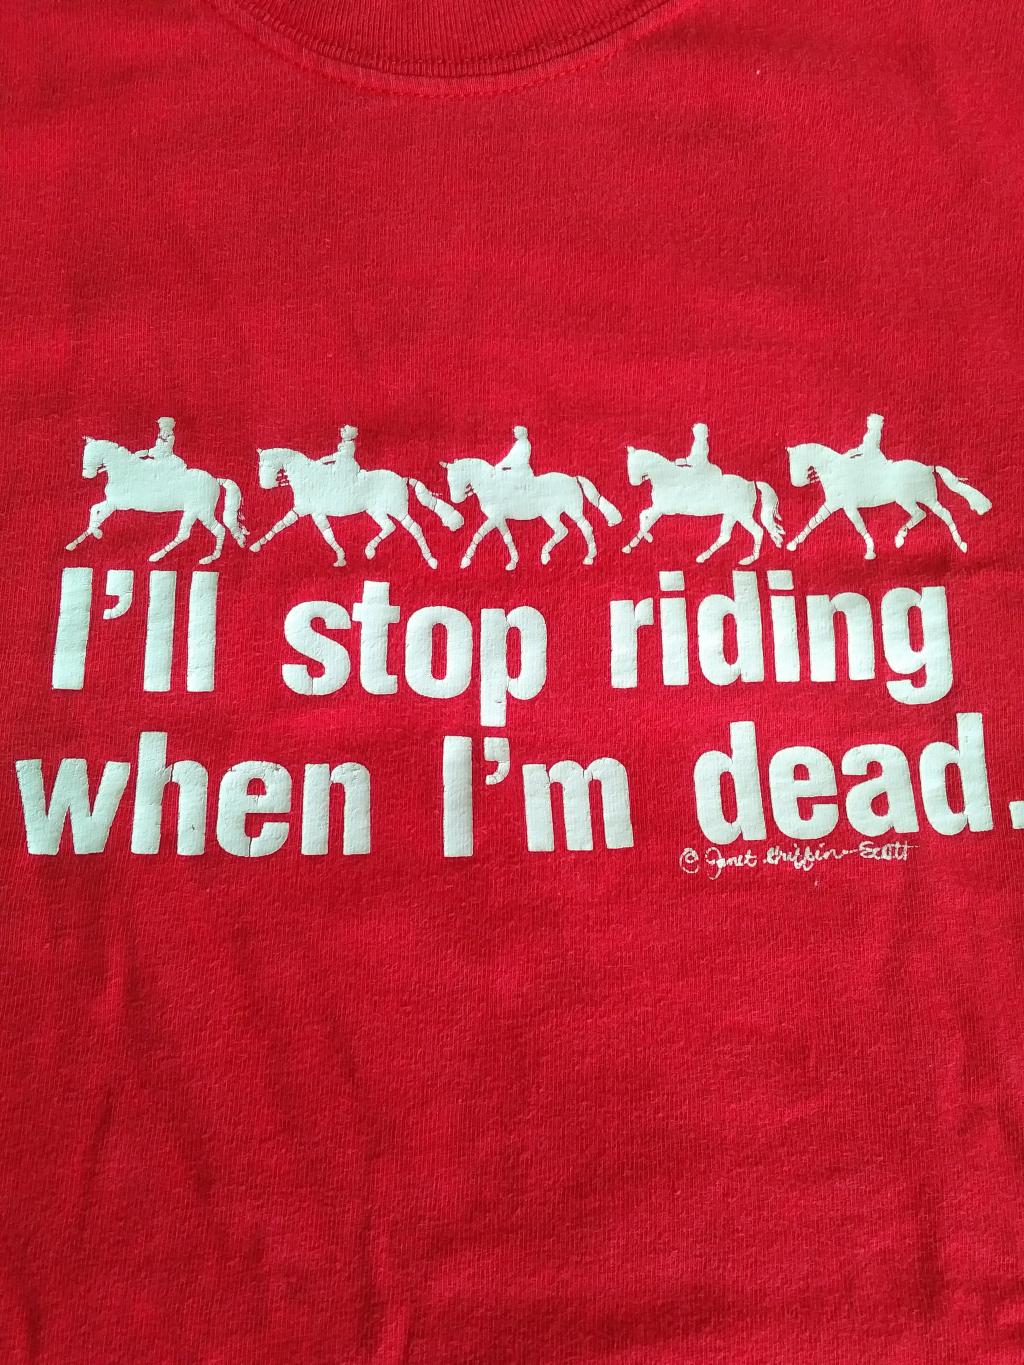 I’ll Stop Riding When I’m Dead!